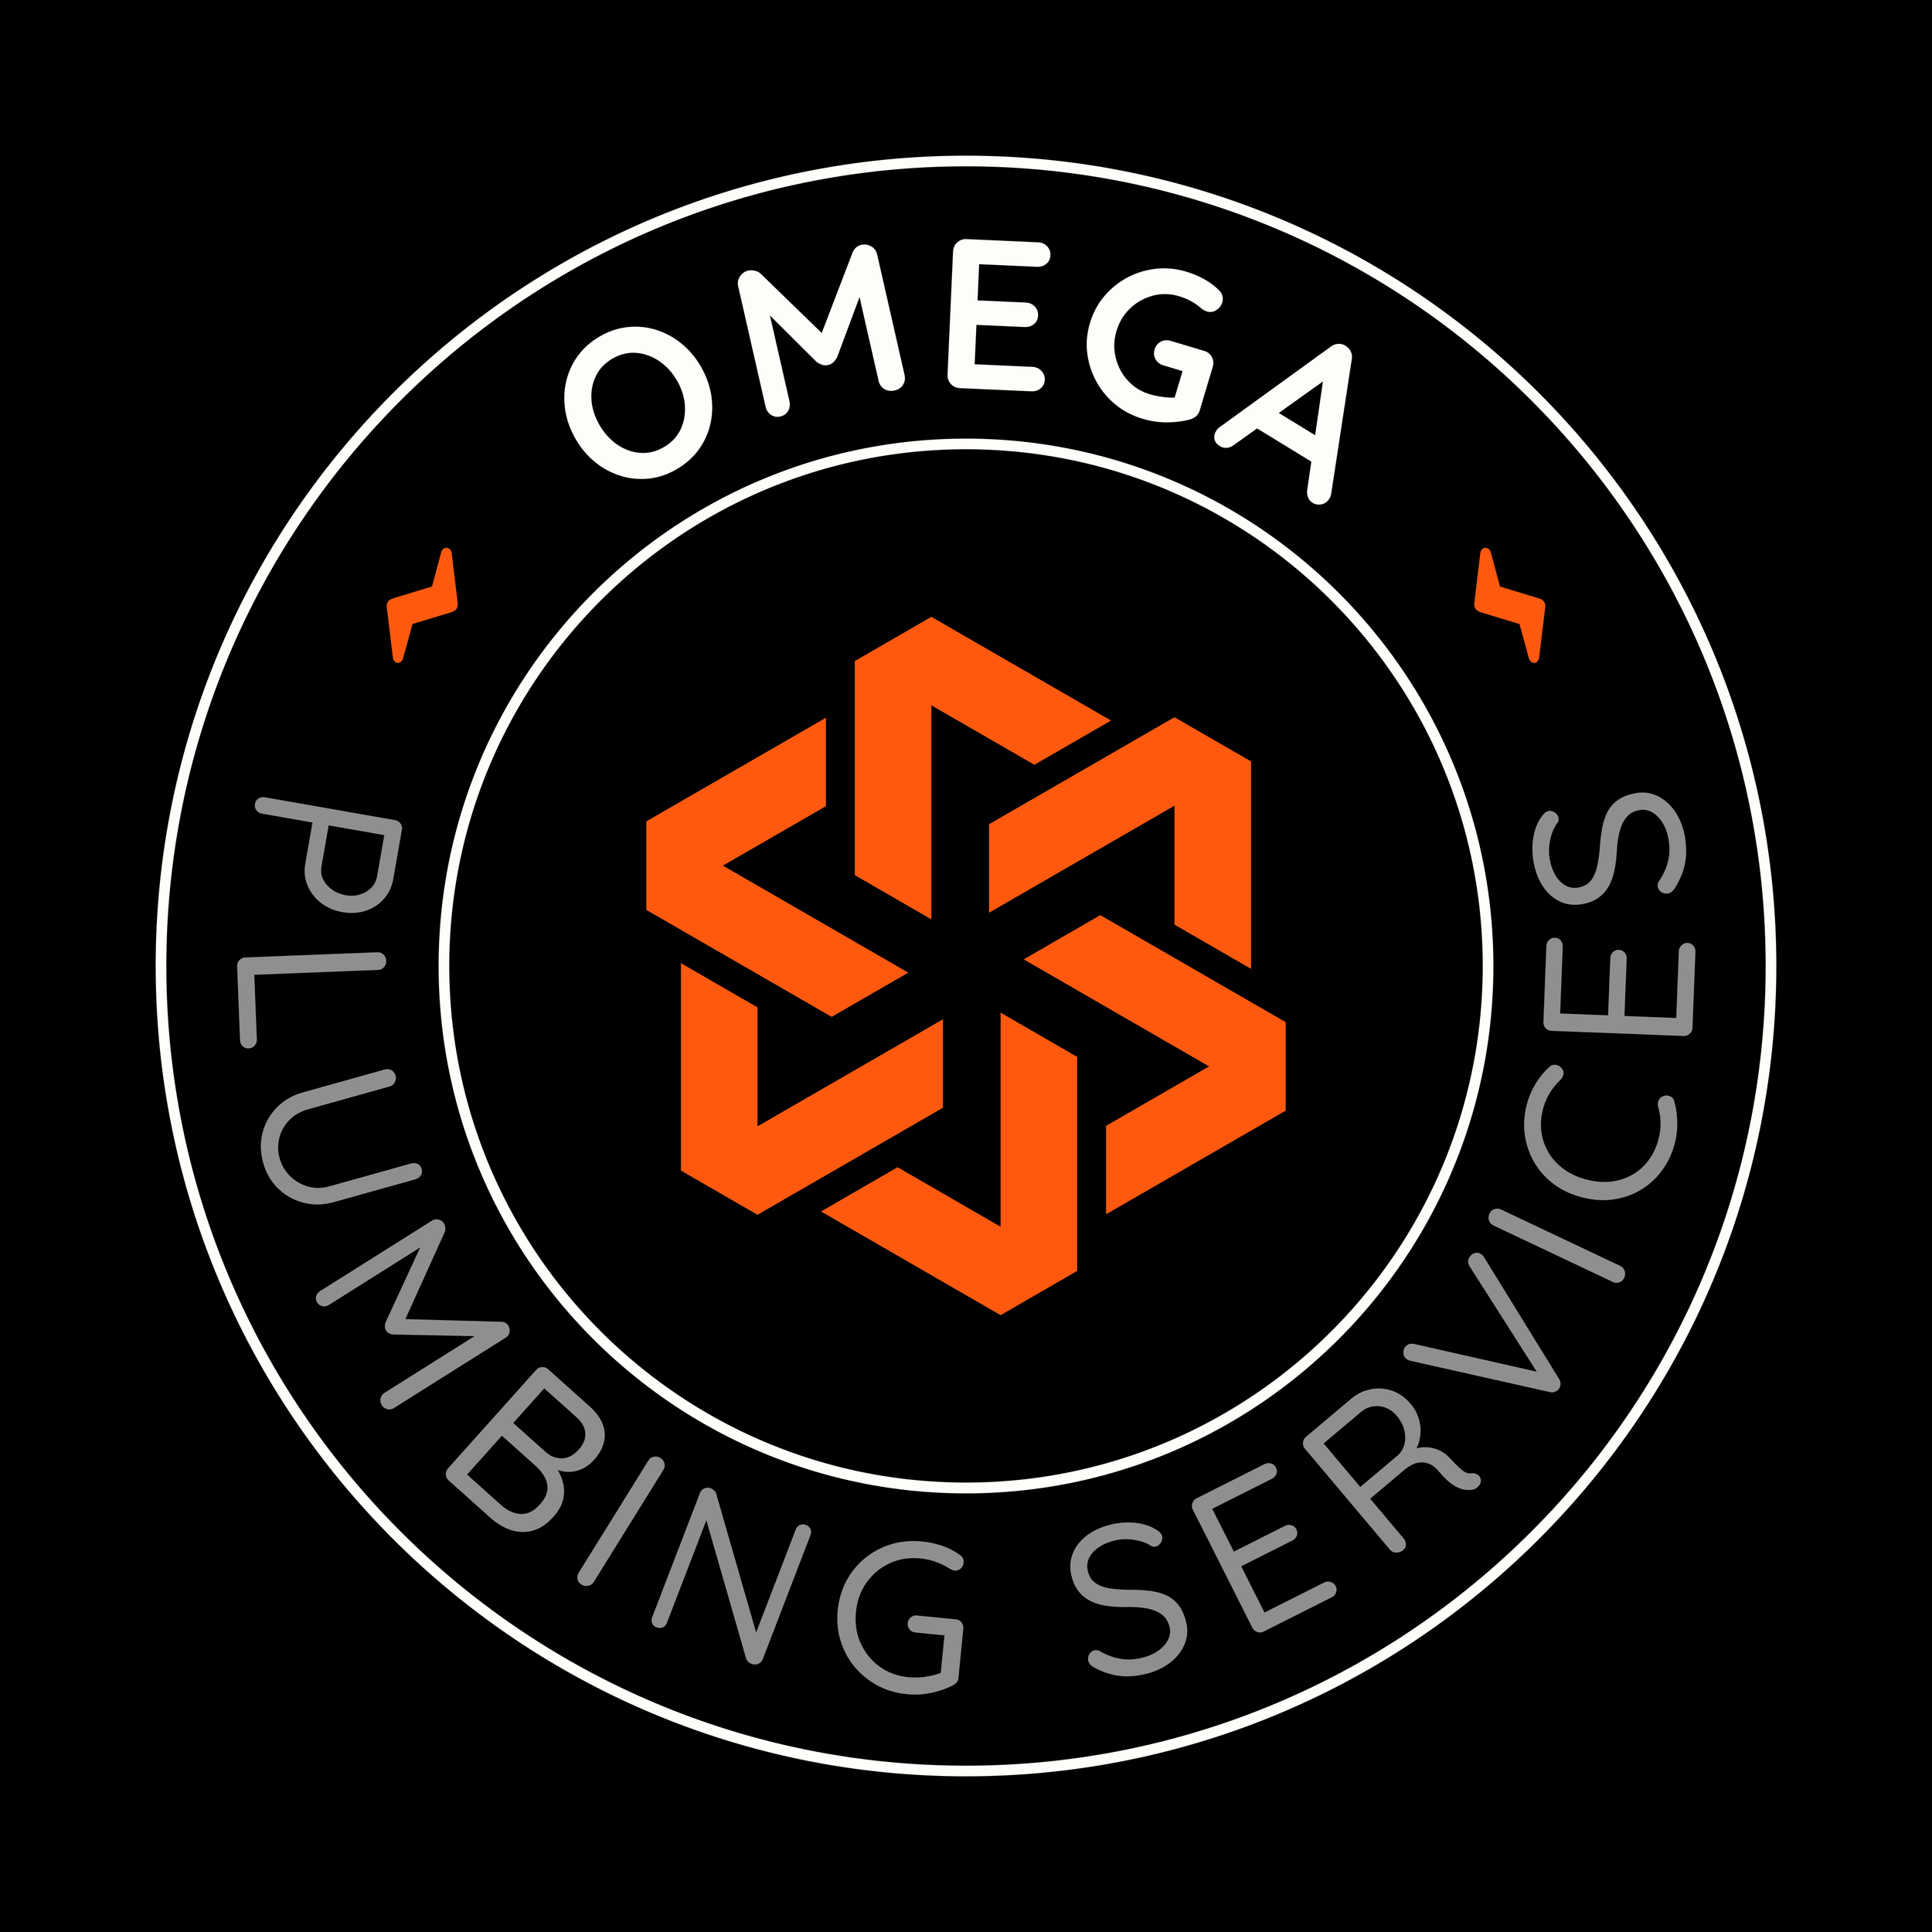 Omega's services